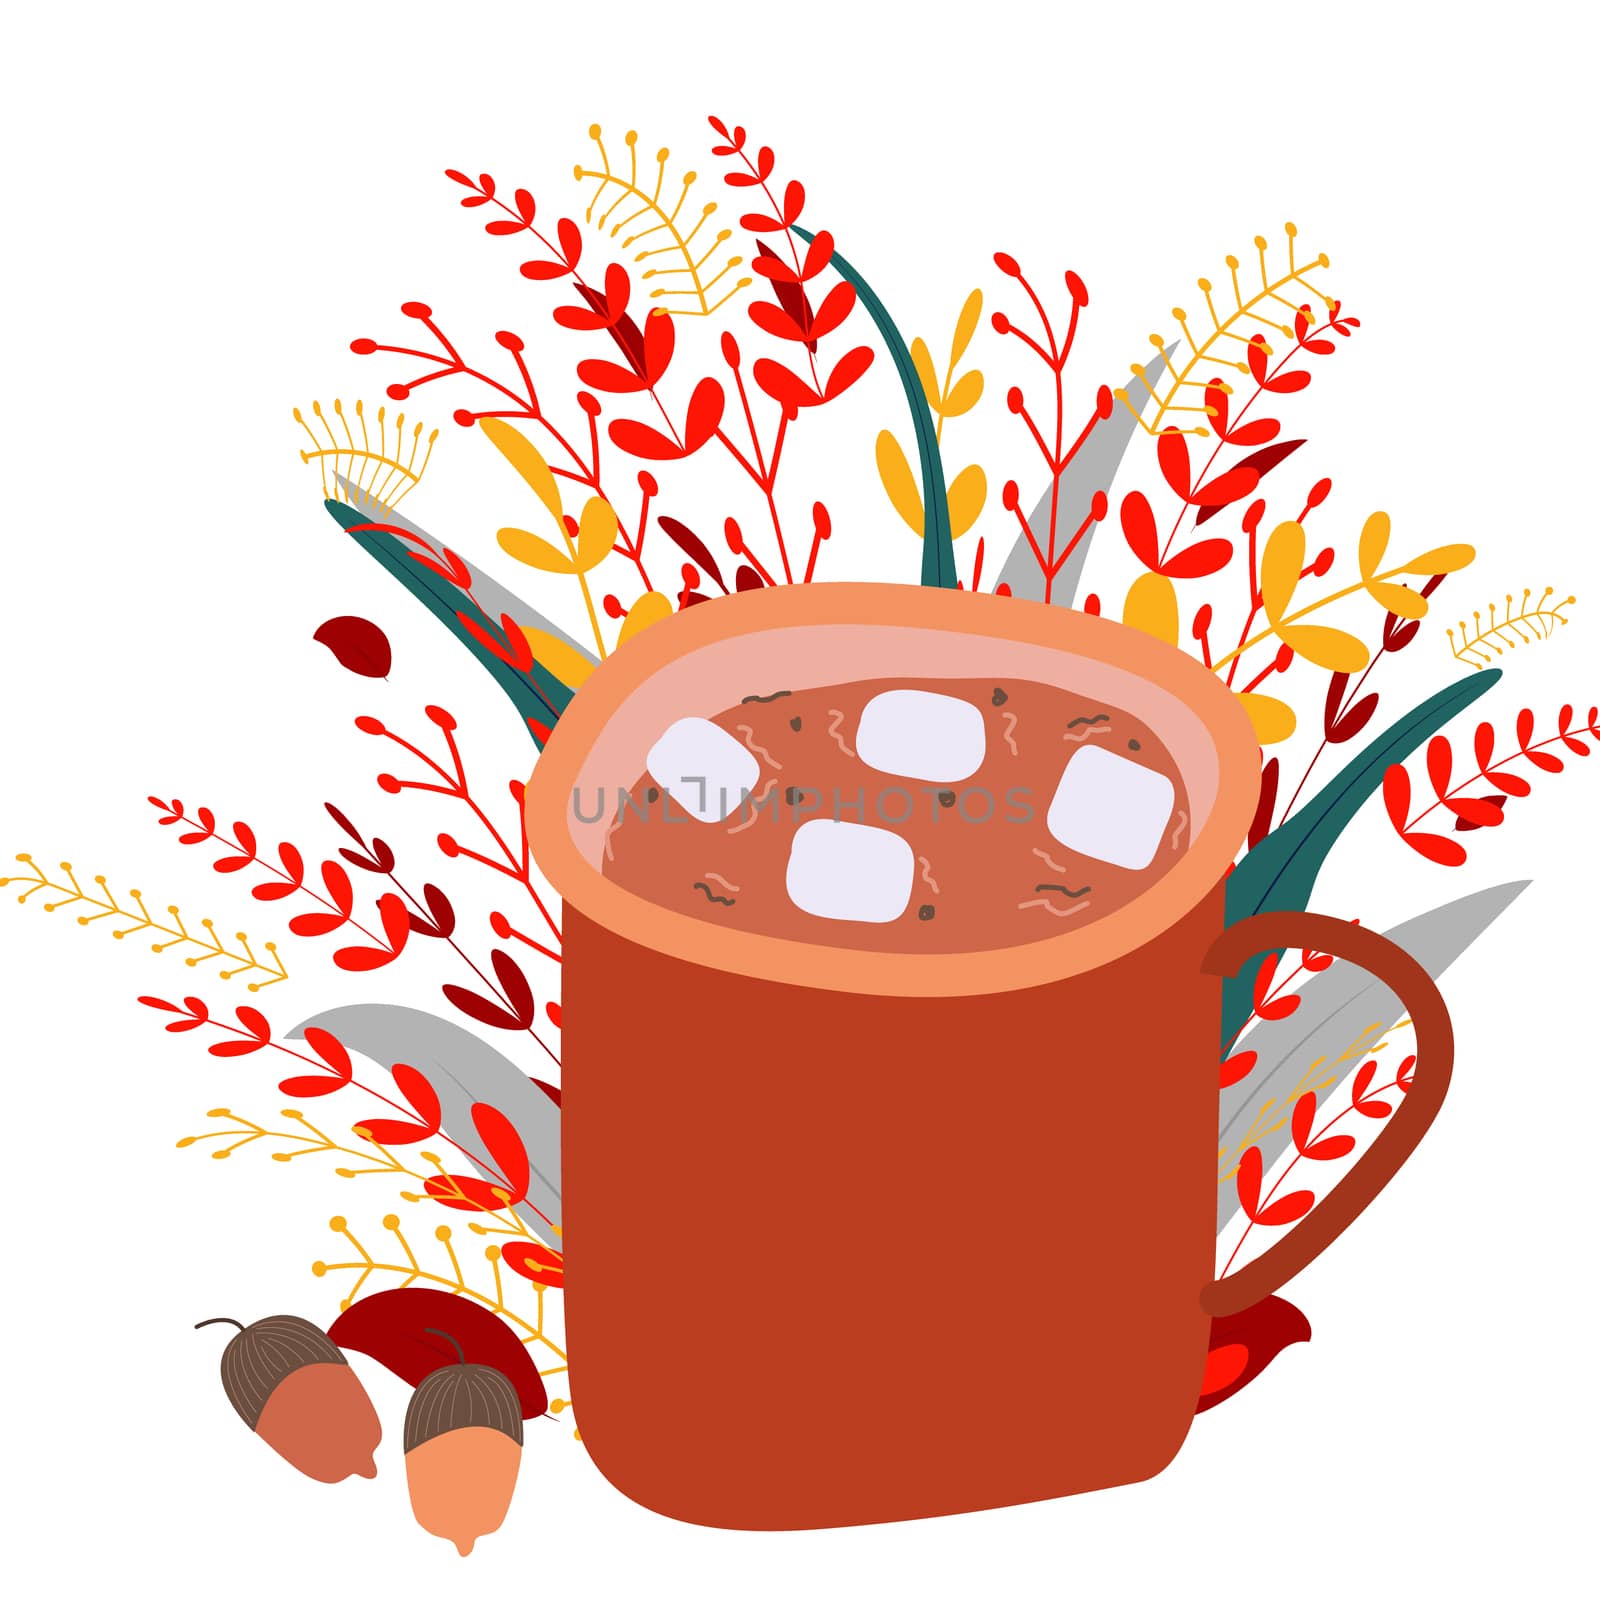 Orange enamel mug with hot chocolate and white marshmallows. Autumn bright foliage and acorn background. for halloween party, thanksgiving. Vector illustration